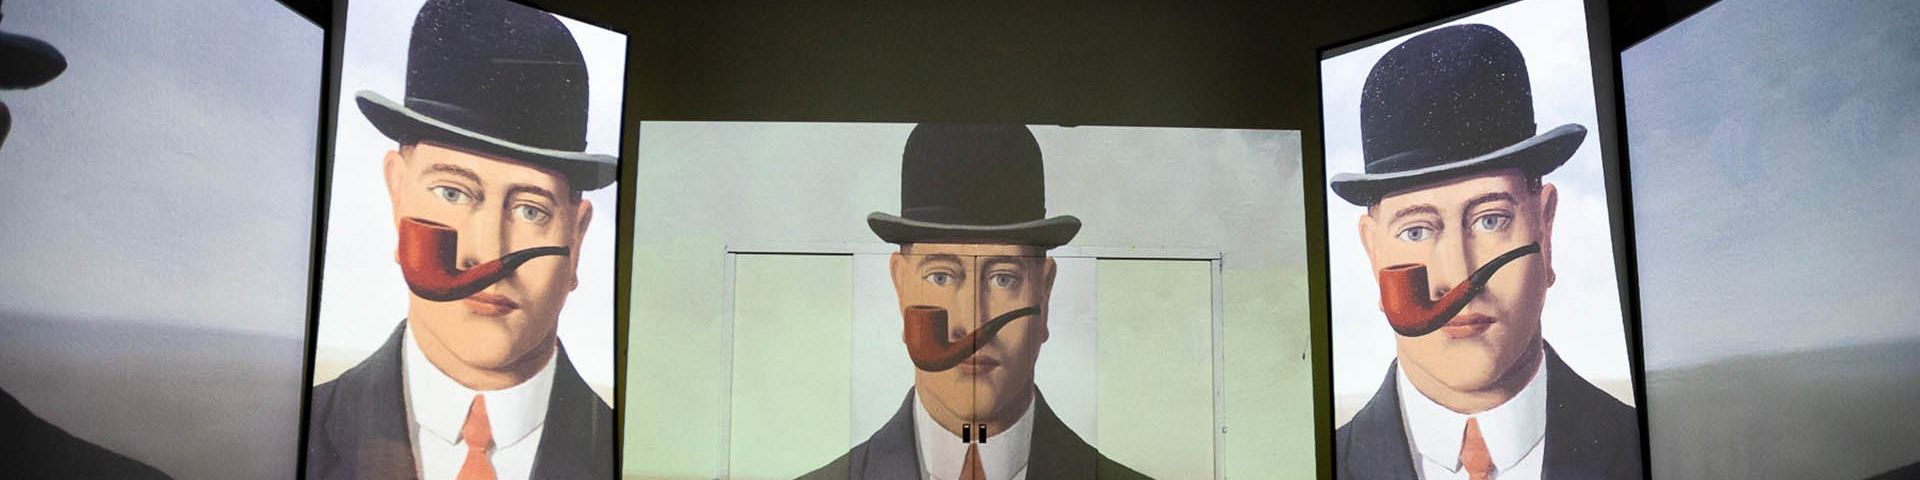 Magritte’s La Bonne Foi or ‘Good Faith’ projected three times side by side on the walls of the exhibition.